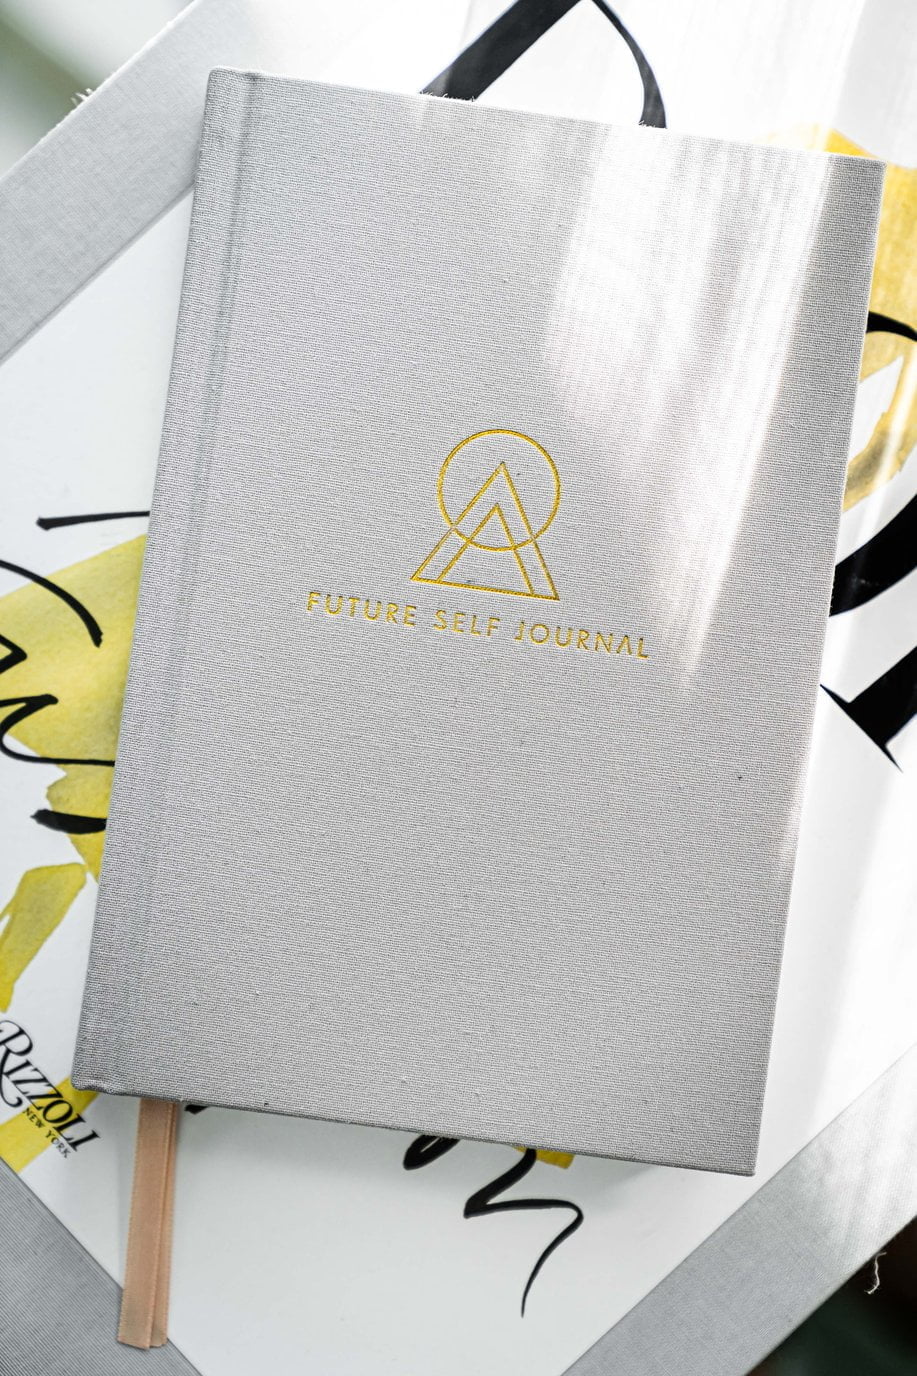 Future Self Journal Free Shipping On Orders Over $75